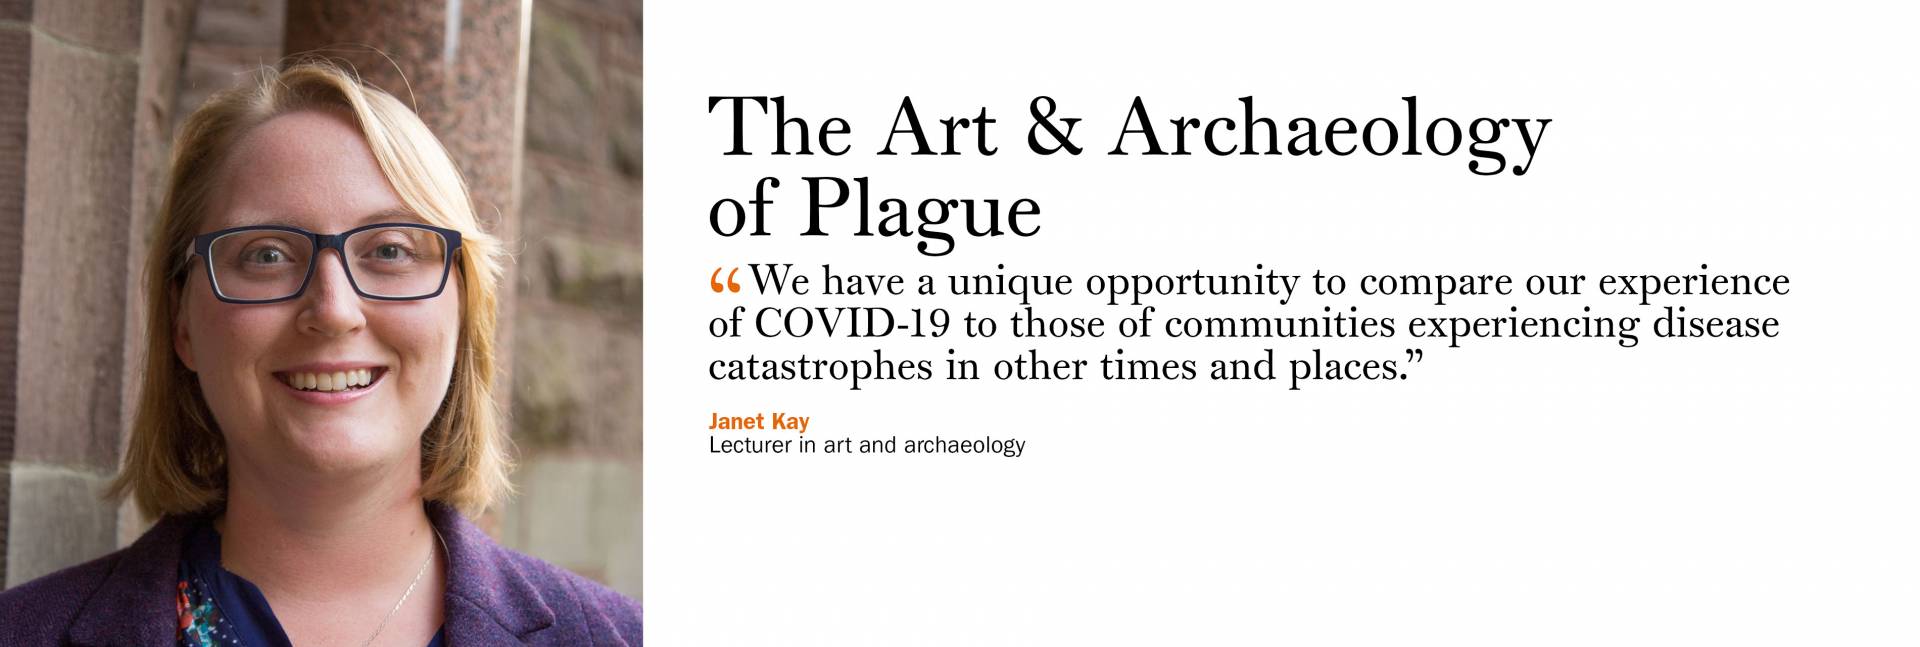 The Art & Archaeology of Plague.  Janet Kay, lecturer in art and archaeology  “We have a unique opportunity to compare our experience of COVID-19 to those of communities experiencing disease catastrophes in other times and places.”